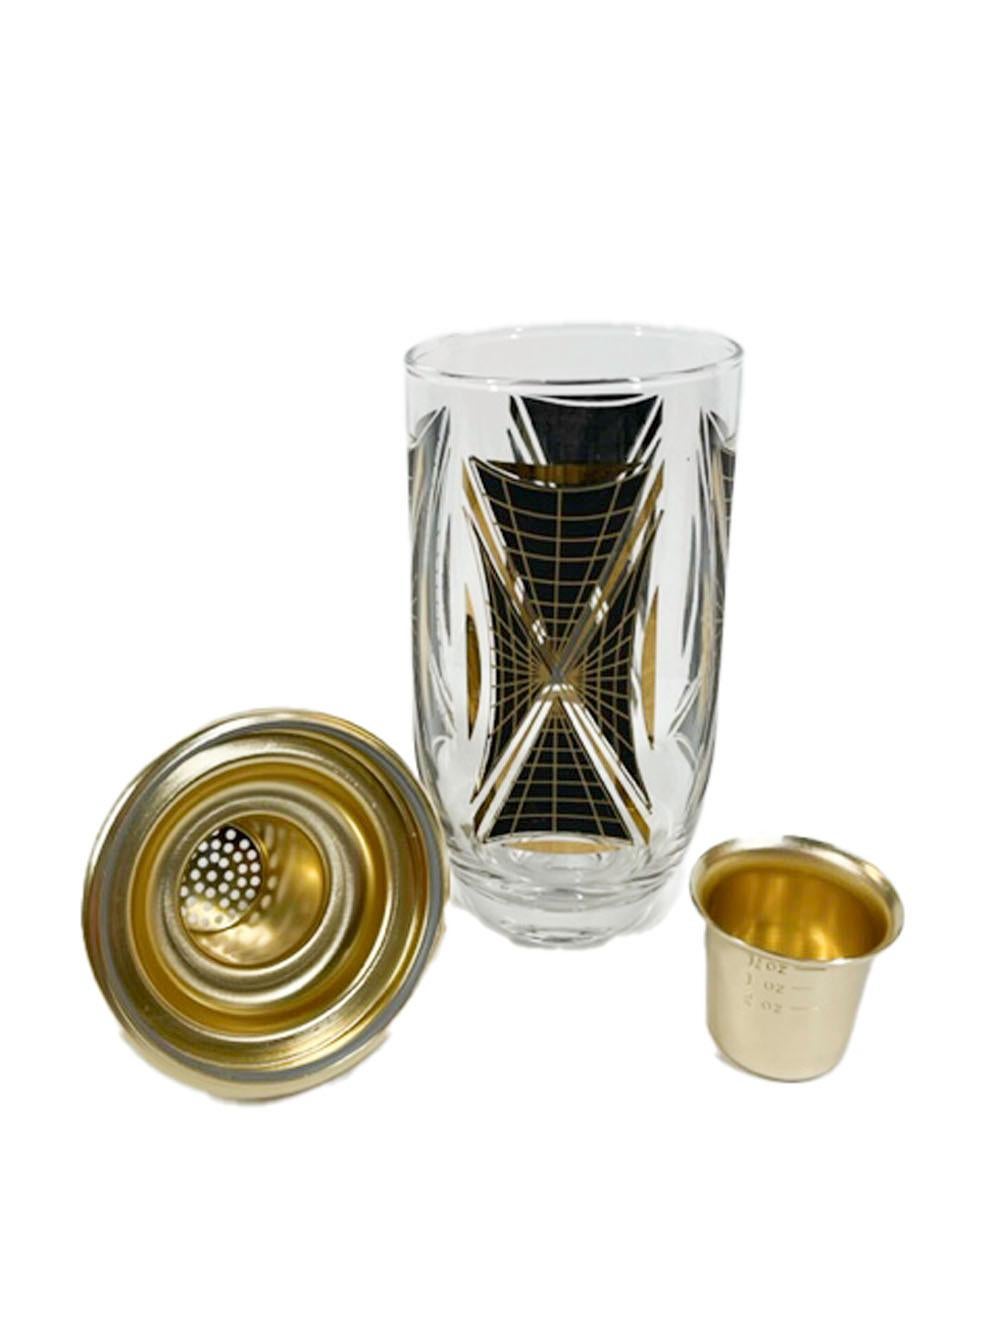 American Vintage Atomic Period Cocktail Shaker with Black and Gold Decoration